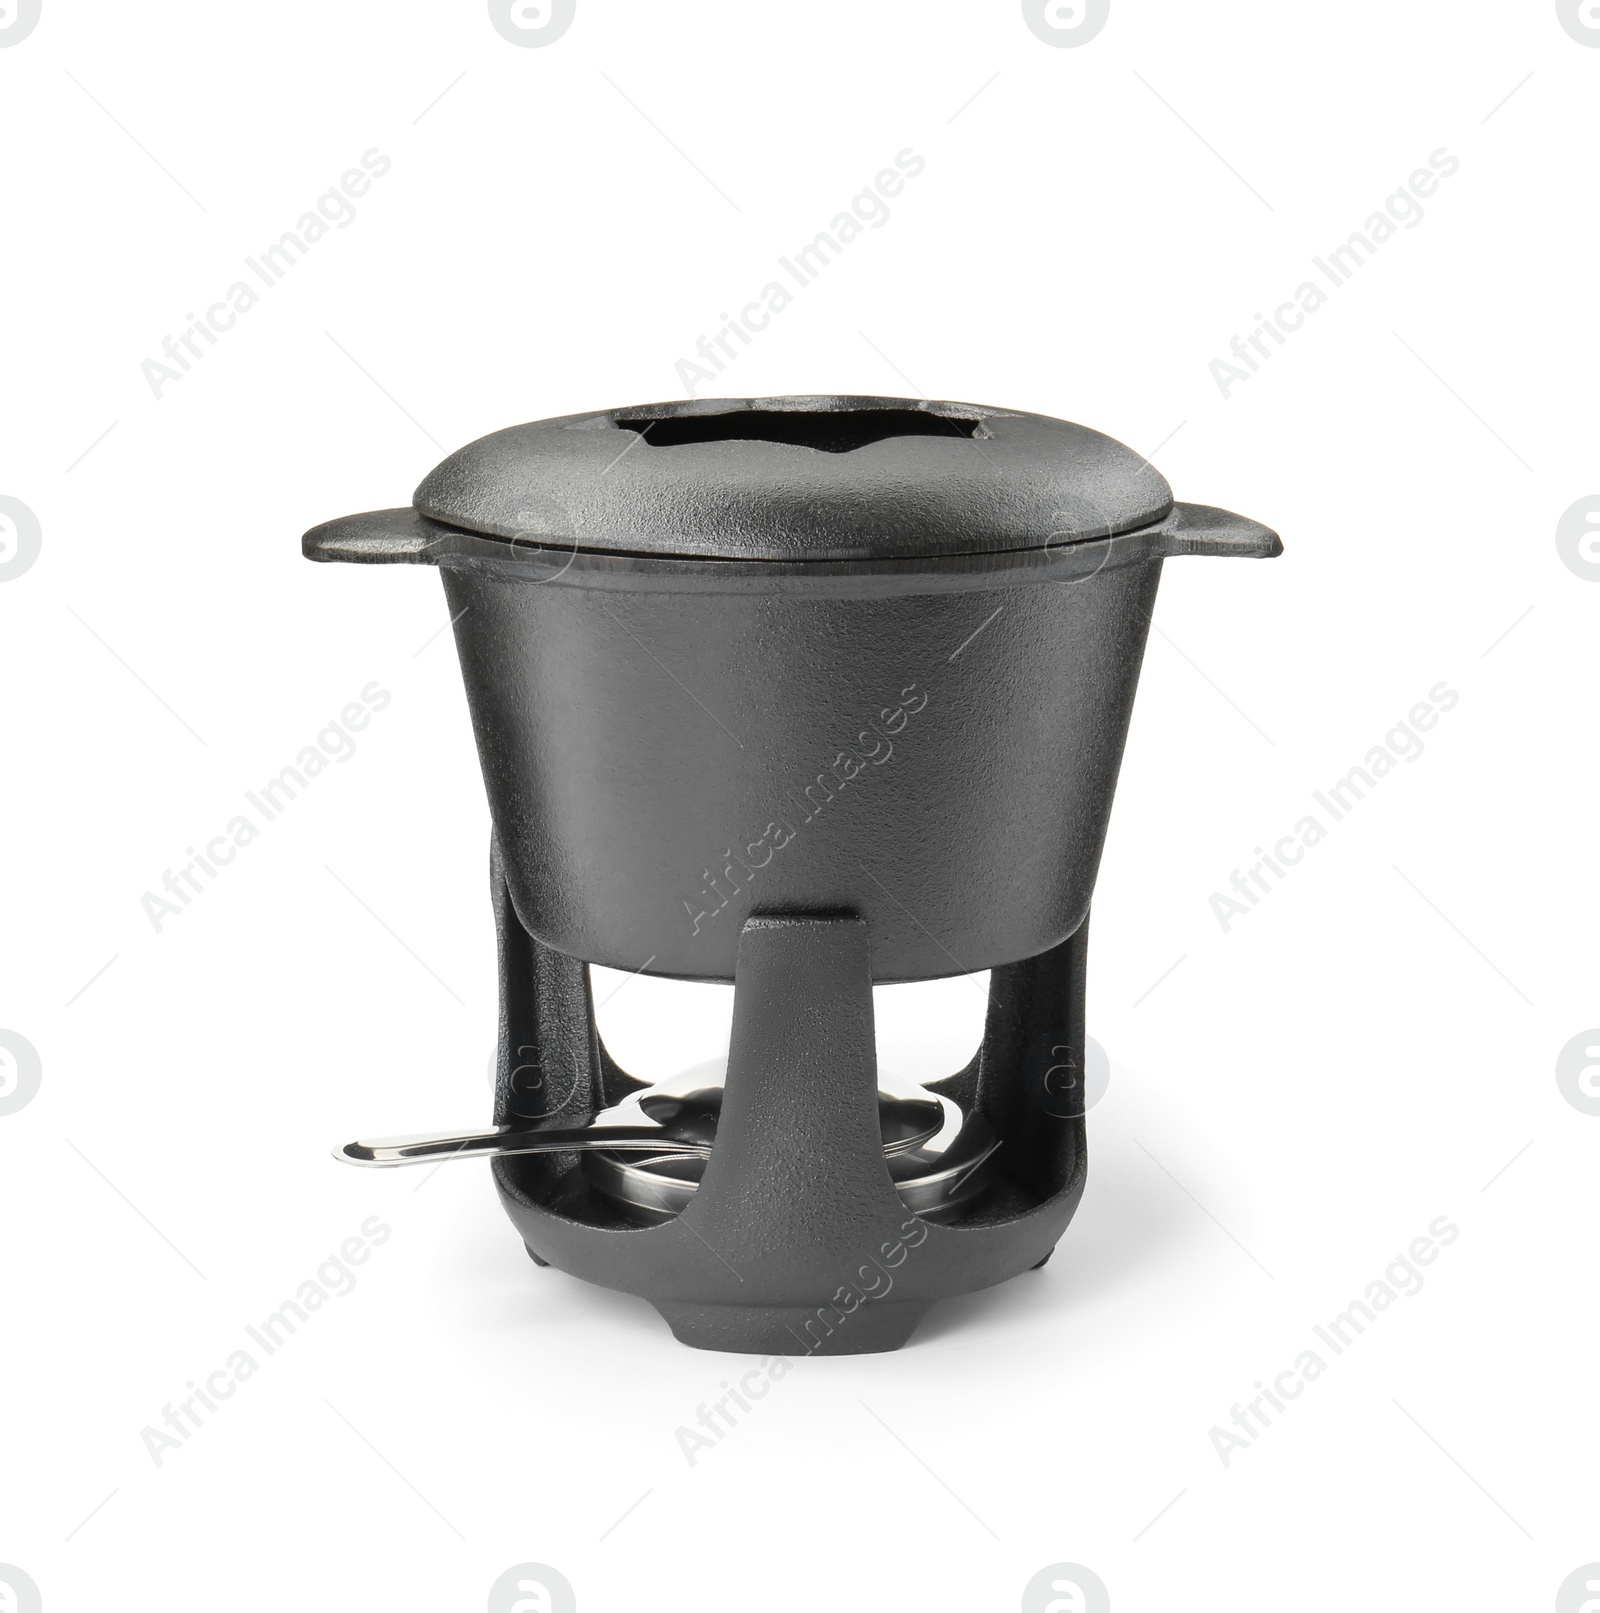 Photo of Fondue set isolated on white. Cooking utensils